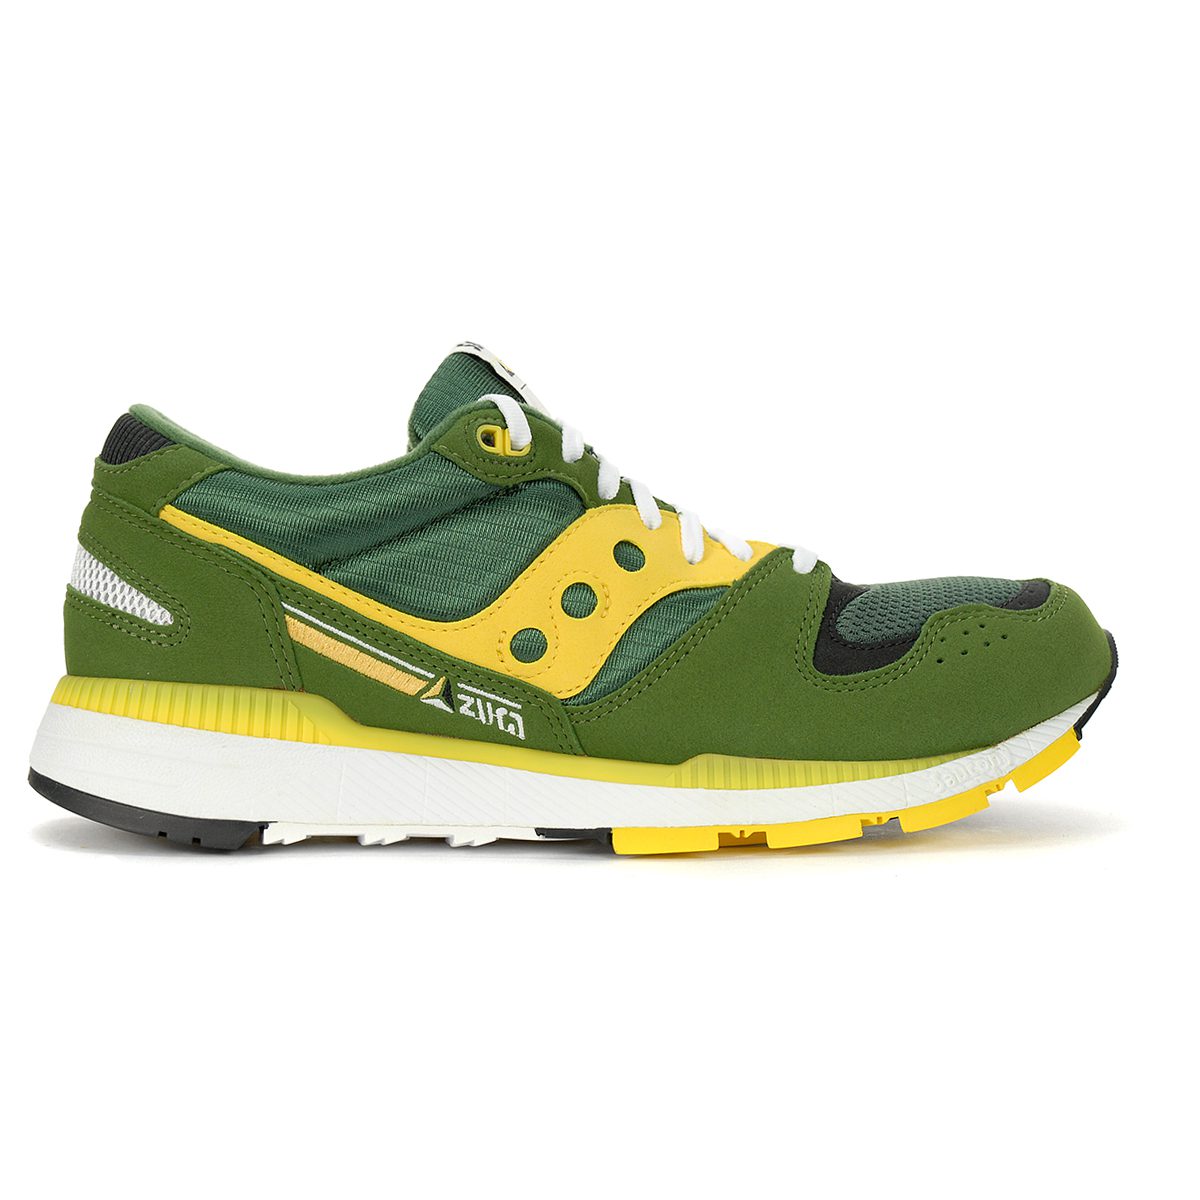 saucony yellow shoes